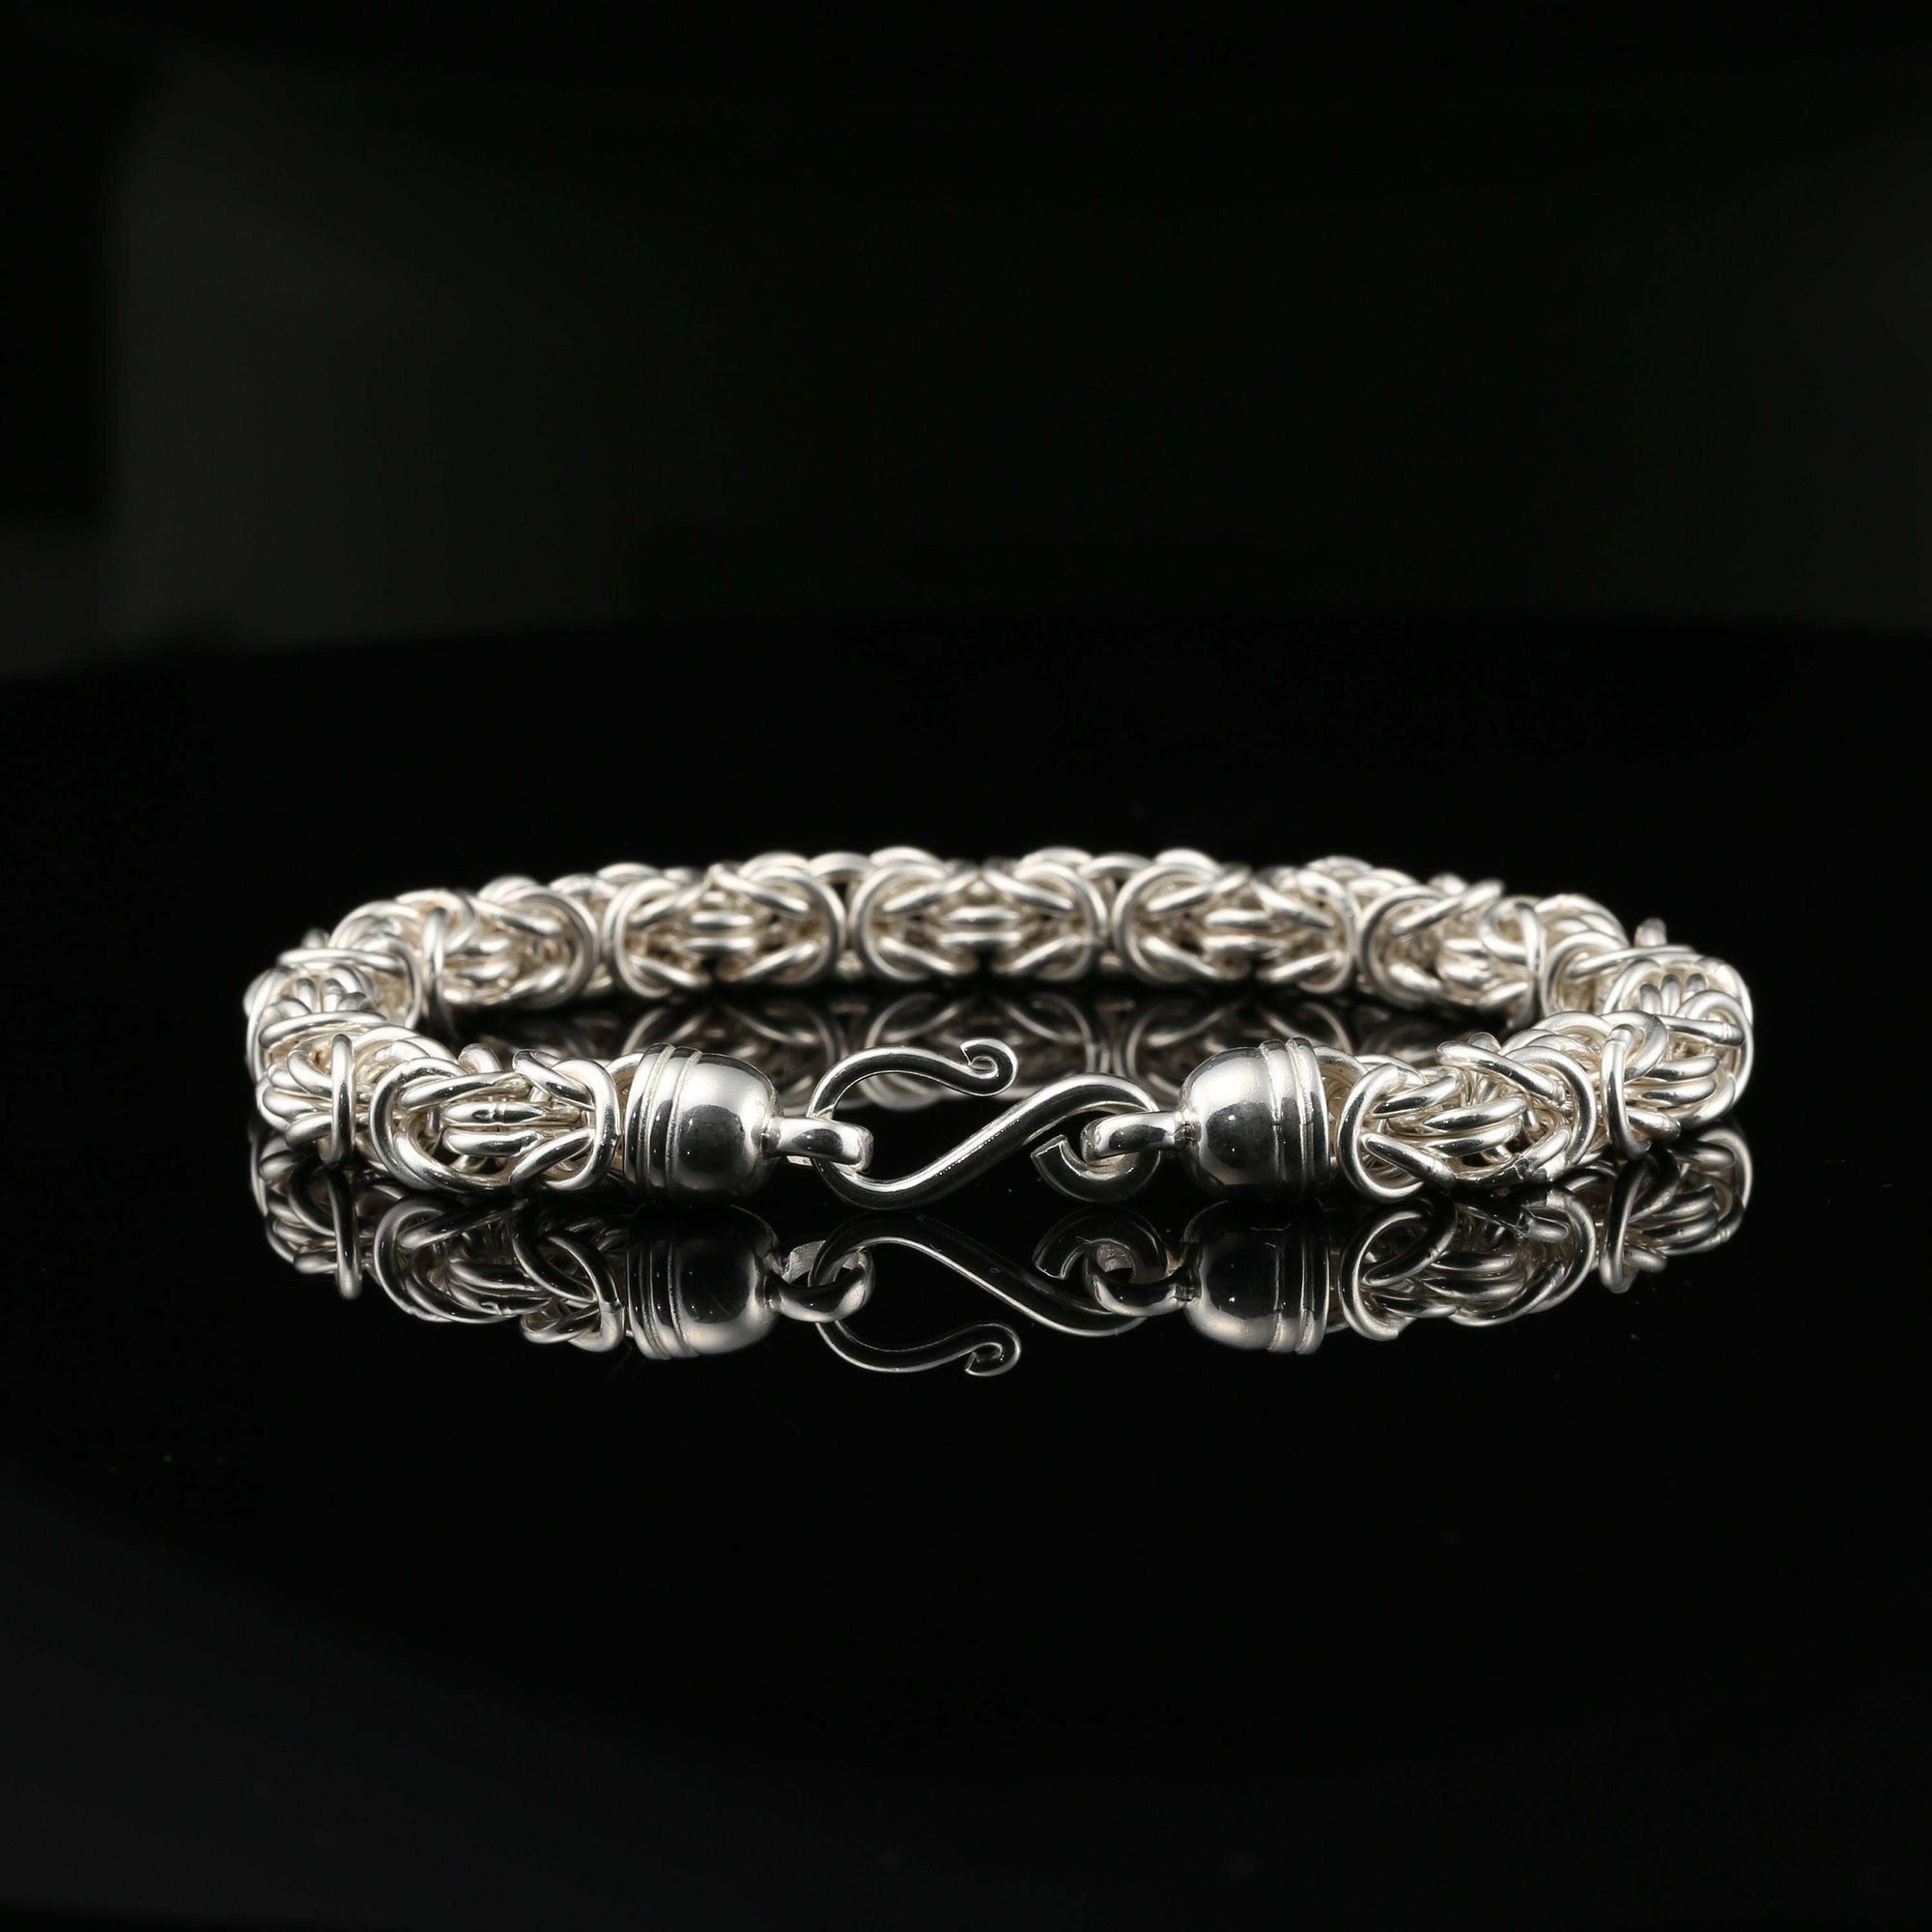 Byzantine Chain Bracelet with Hook Clasp in Sterling Silver, 8.75&quot; Unisex